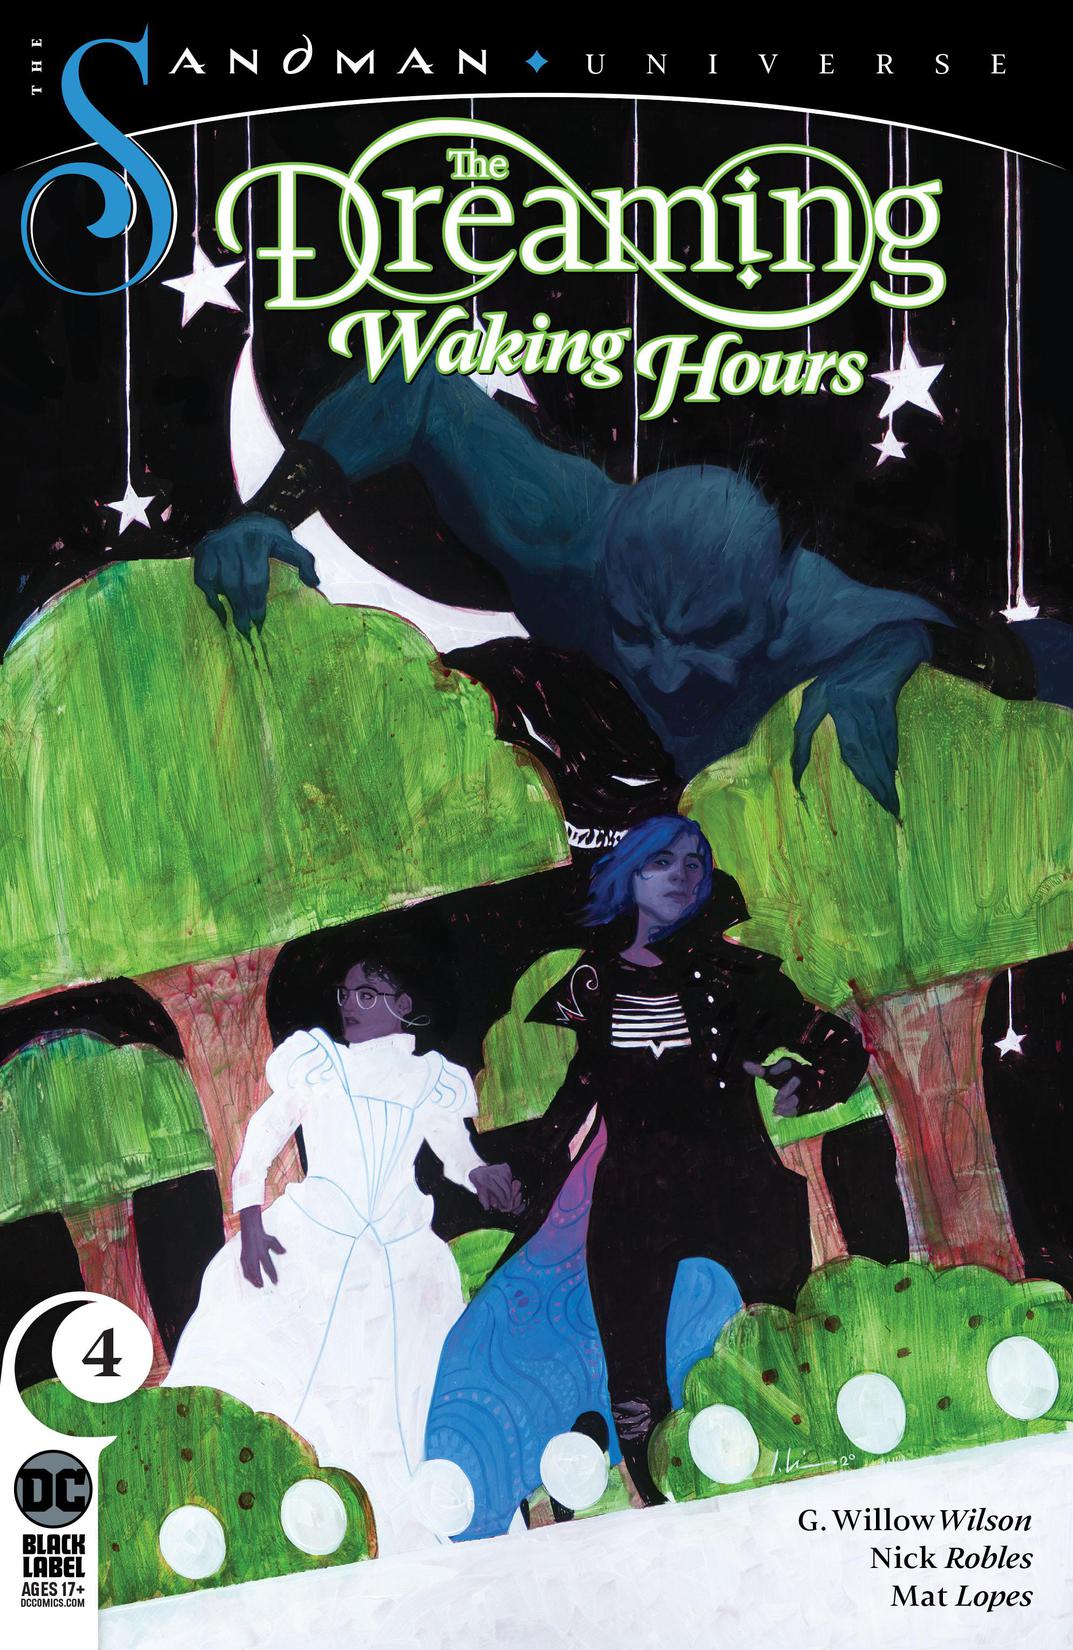 The Dreaming: Waking Hours #4 preview images